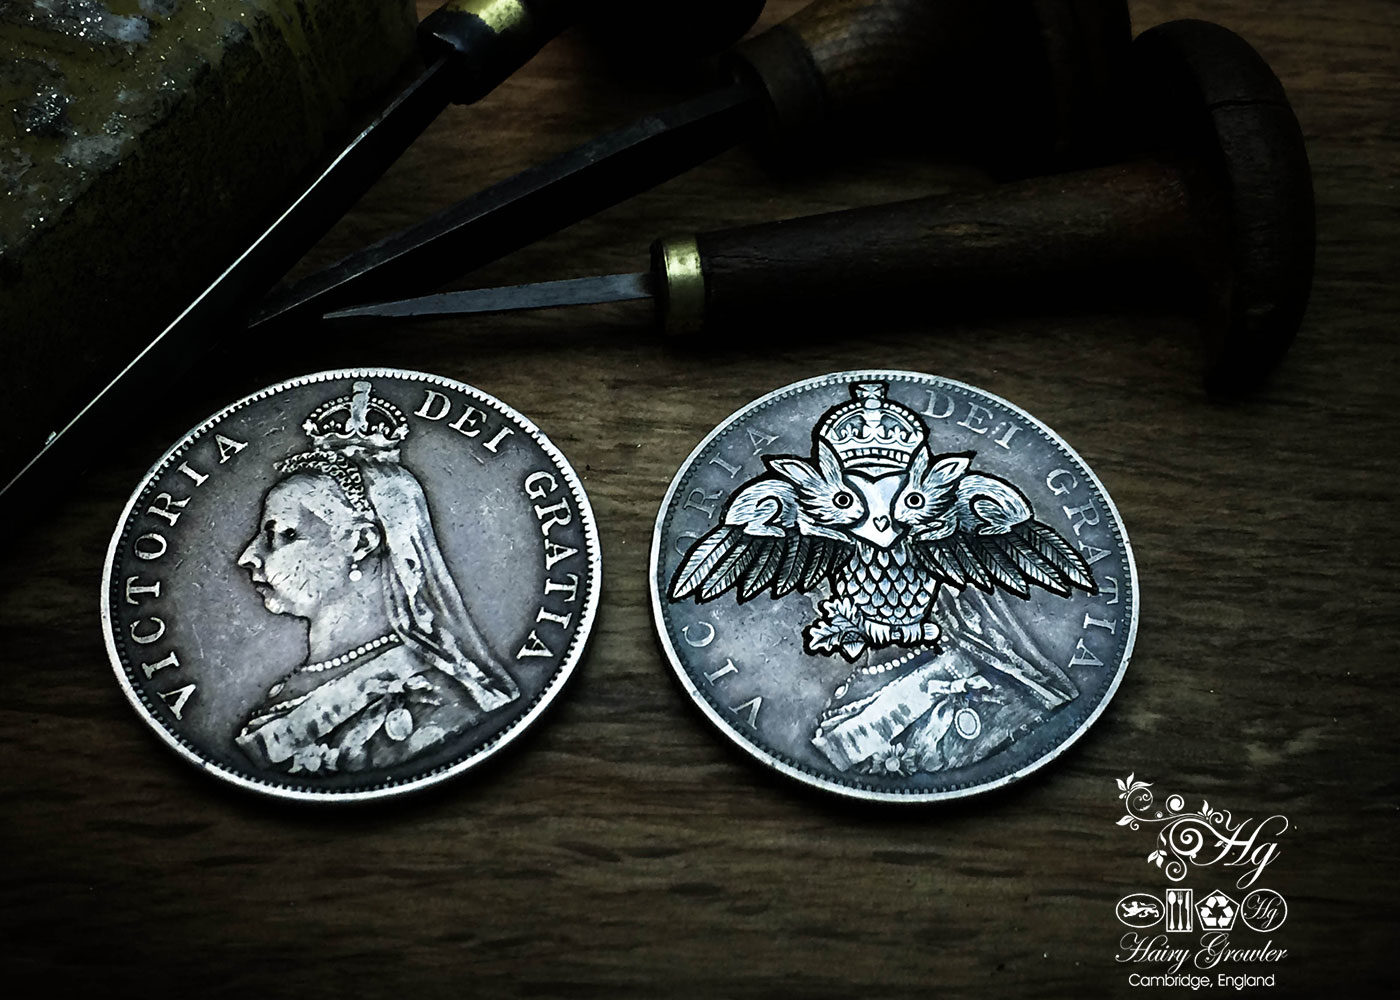 handmade and recycled silver coins hare-y-gr-owl-er charm for a tree sculpture, necklace or bracelet